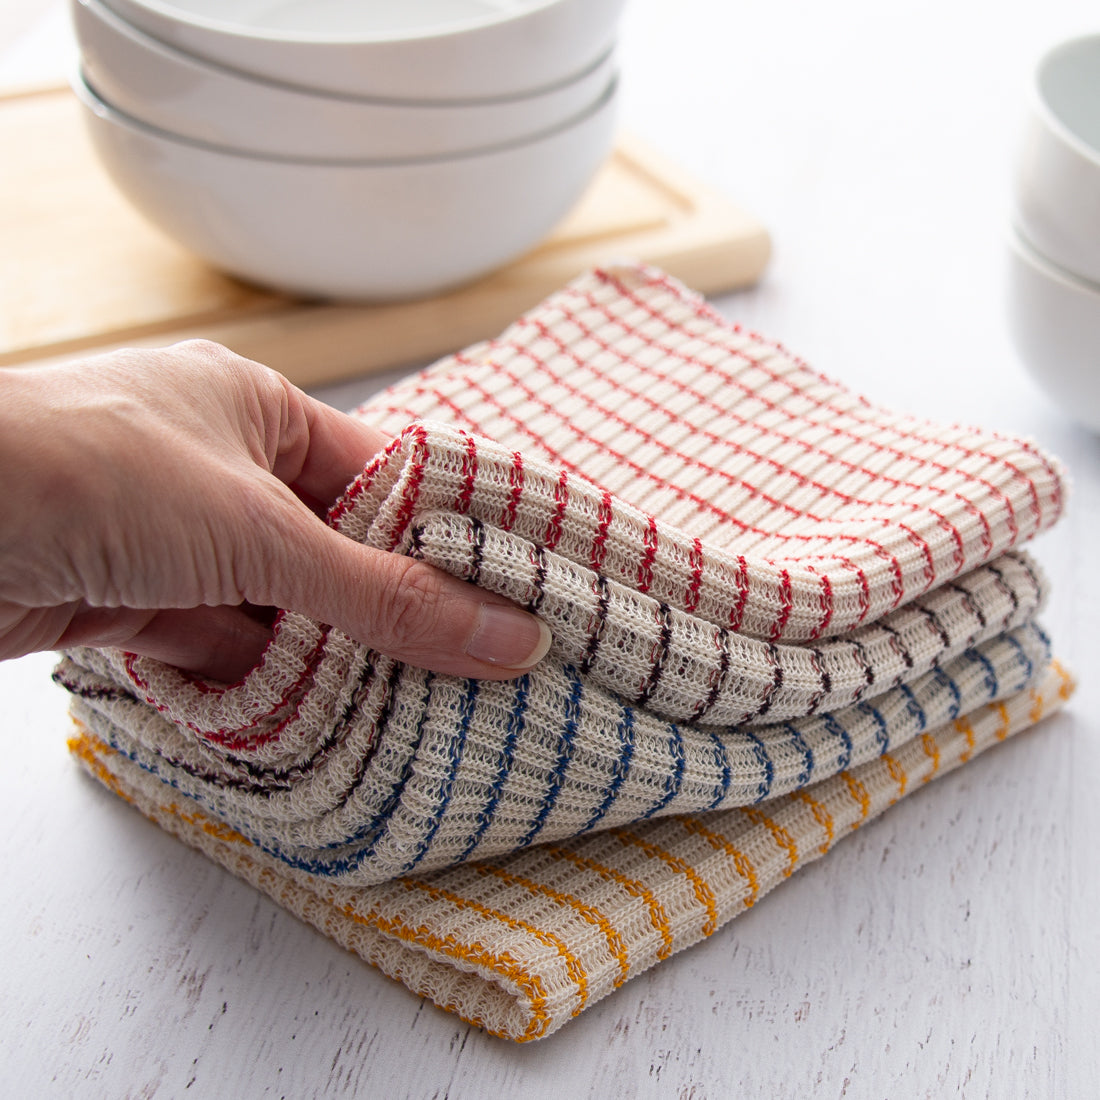 Terry Kitchen Towel 16 x 26, 100% Cotton Quick Dry Kitchen Tea Towels, Bar Towels, Super Soft and Absorbent Dish Towels for Kitchen, 6-Pack, Yellow